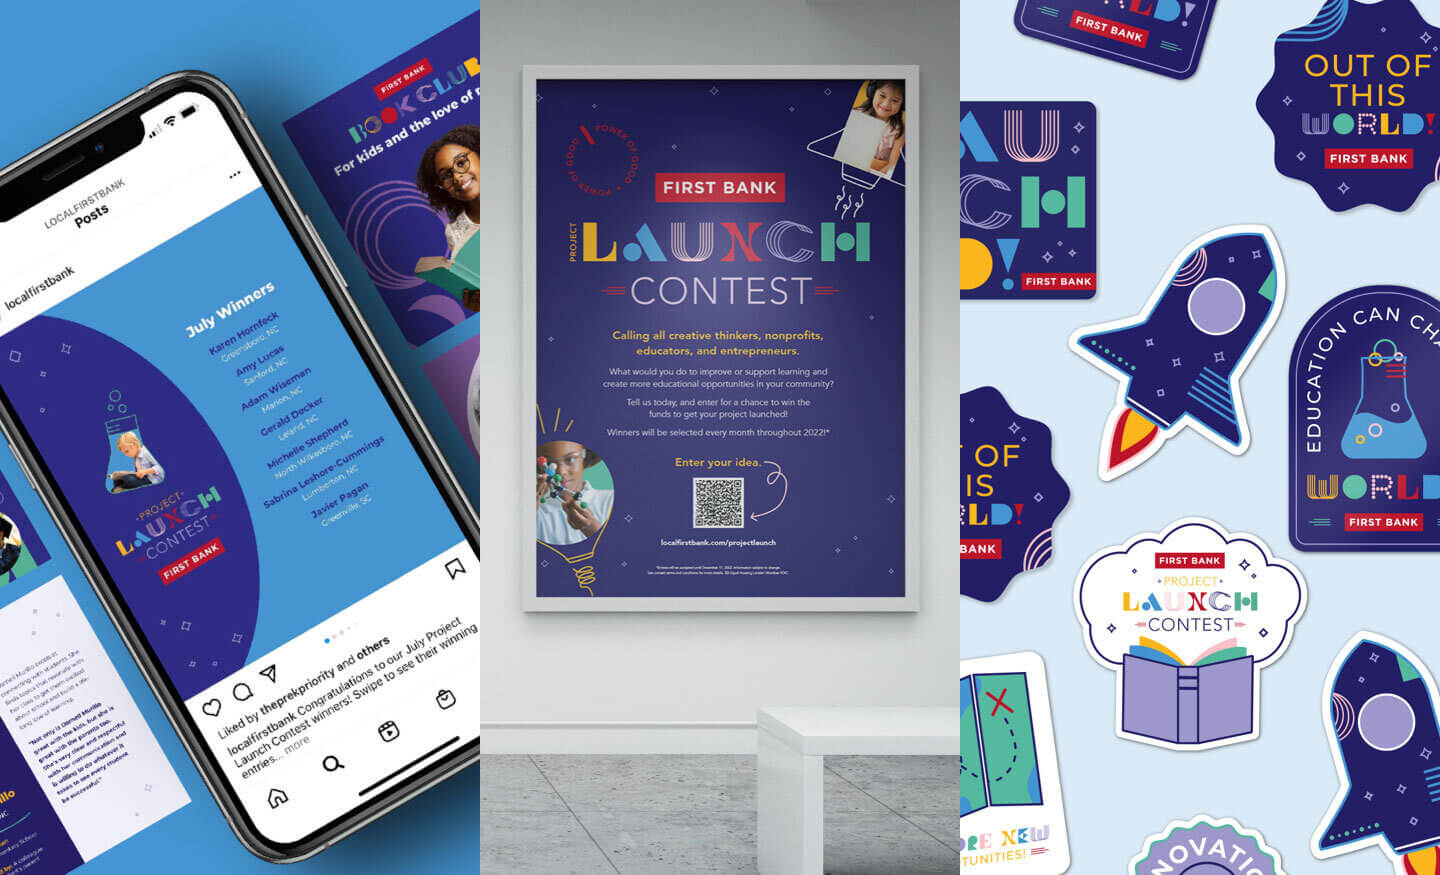 First Bank Launch Contest materials